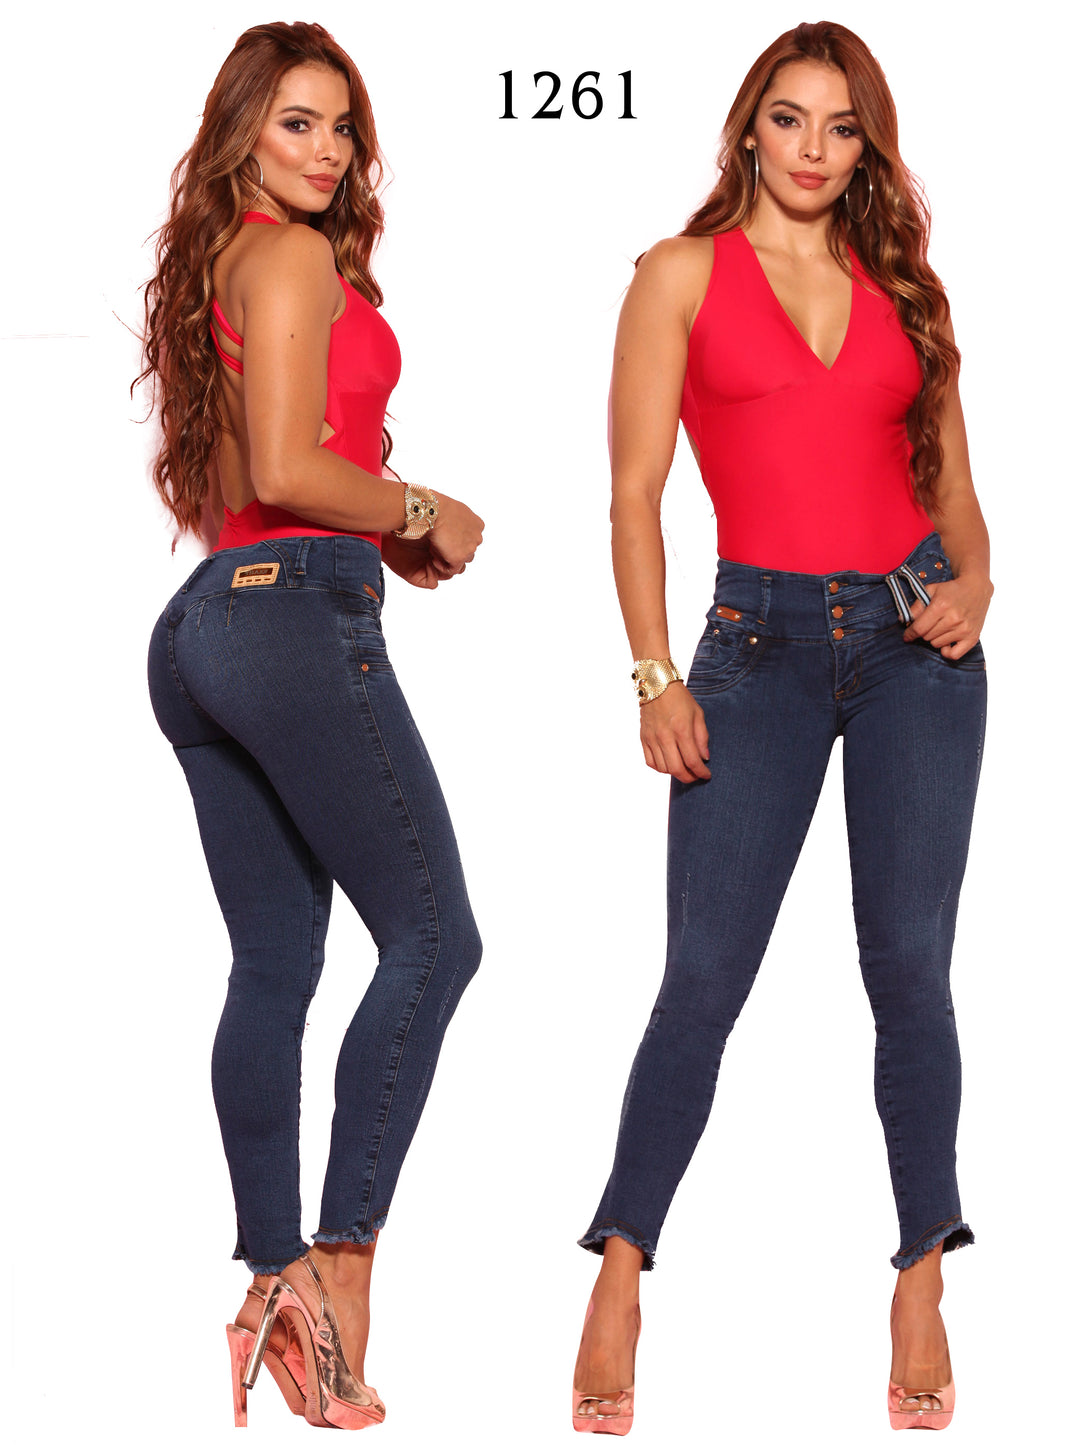 Jeans Levantacola Colombiano Thaxx Boutique